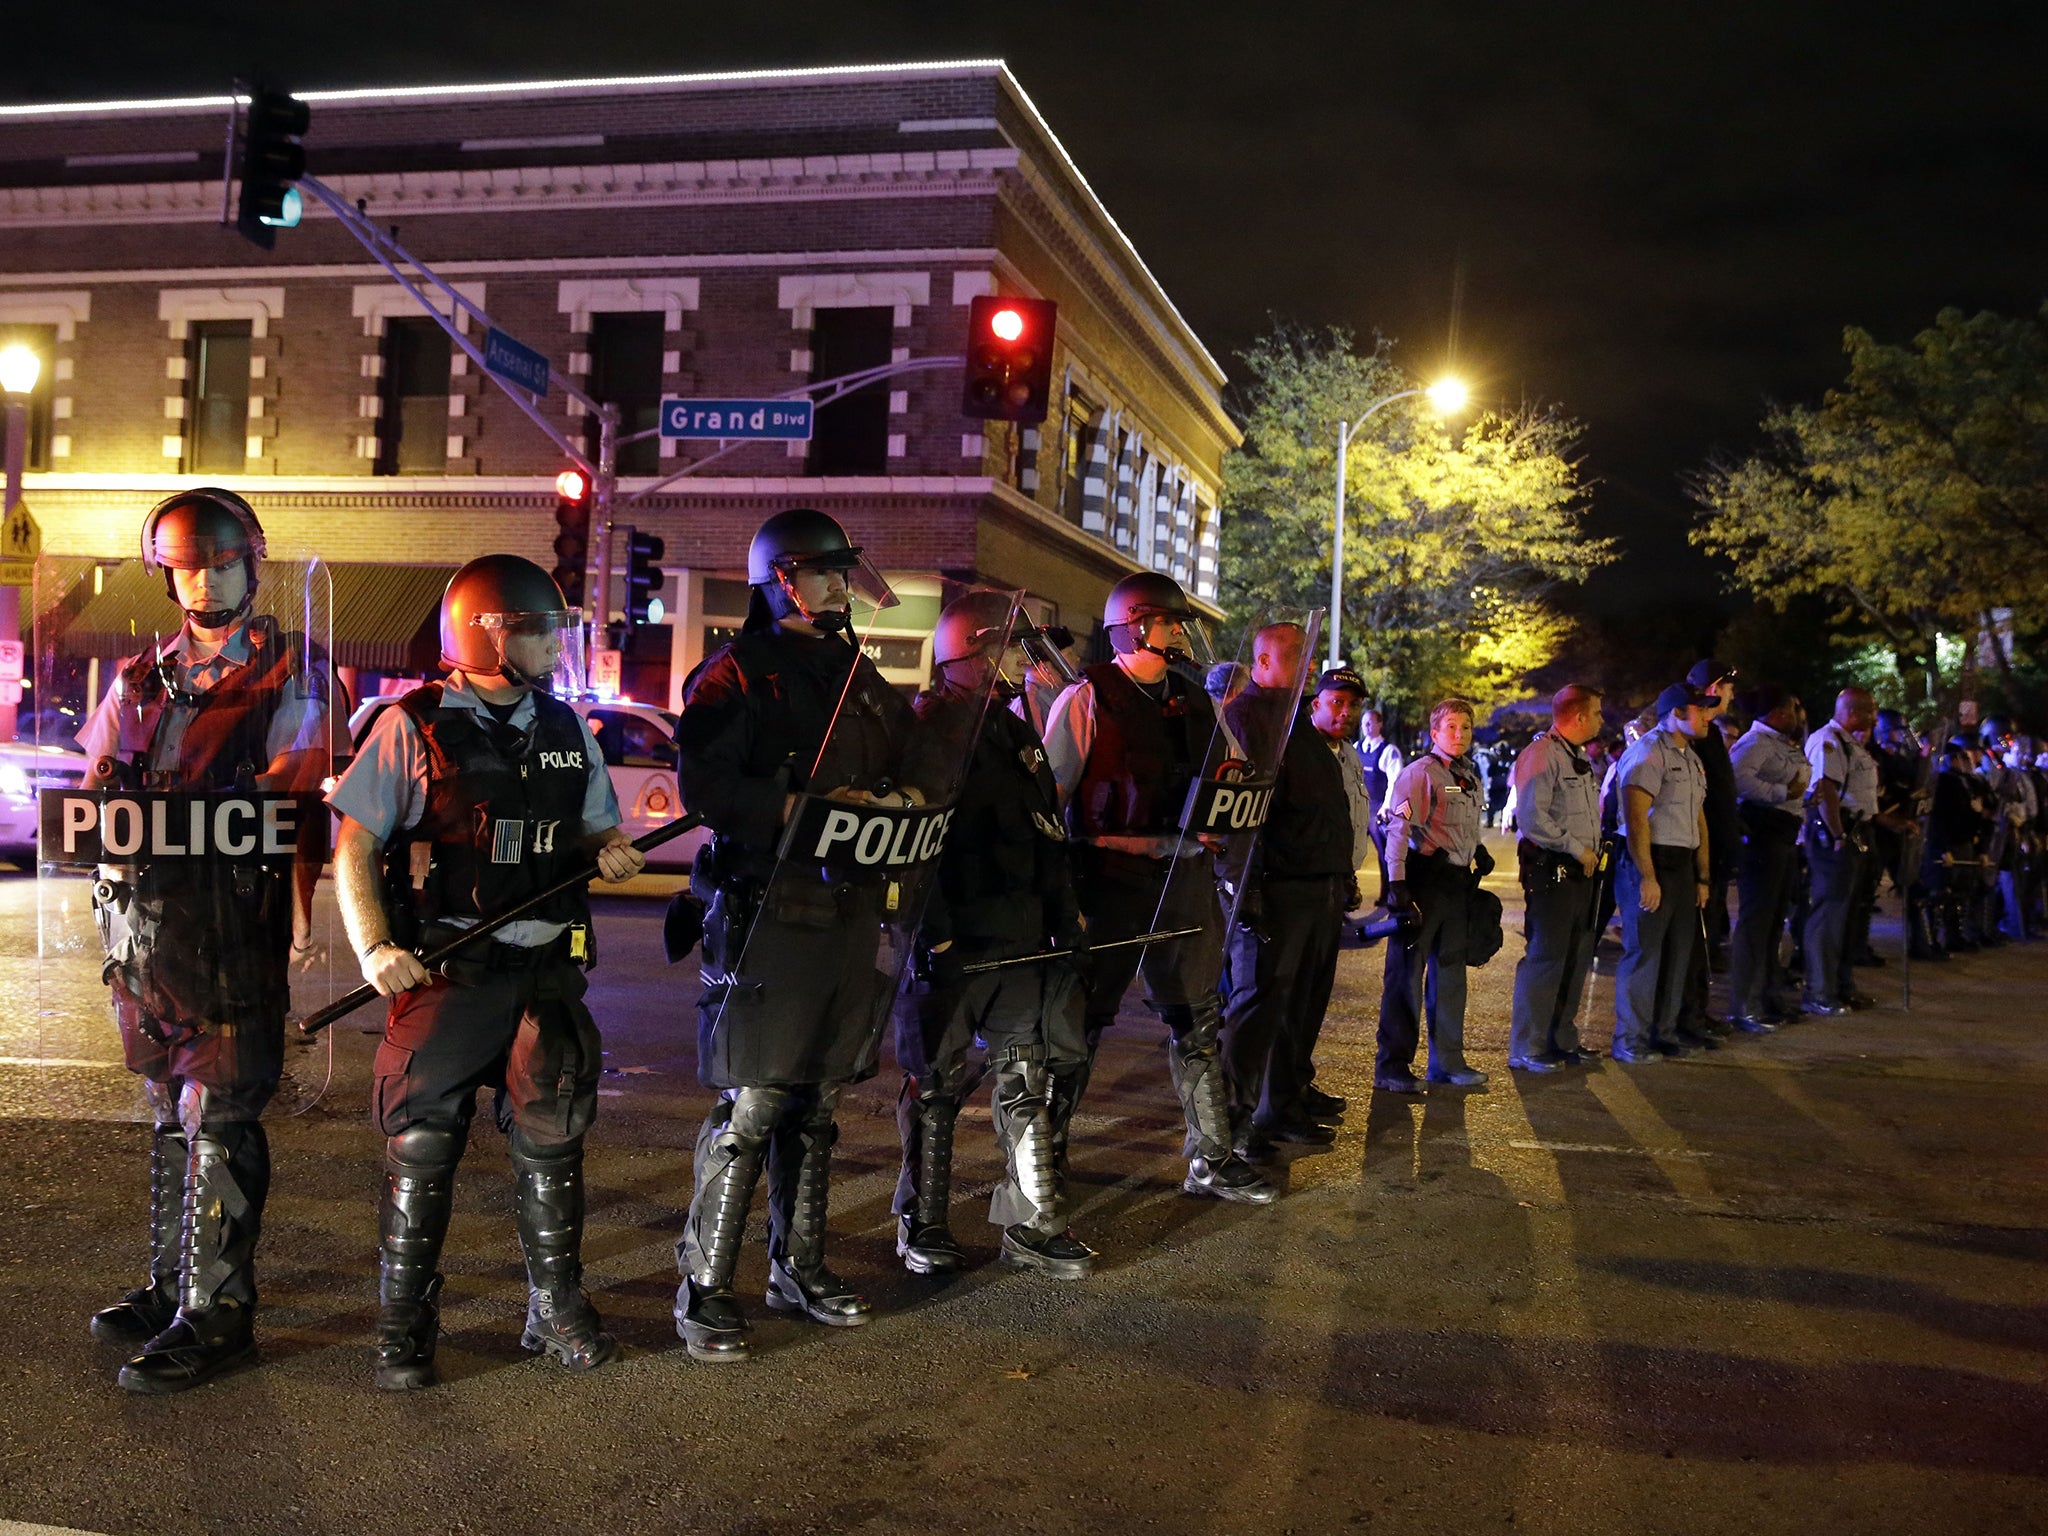 Police wearing riot gear form a line to contain protesters, a day after Vonderrit D. Myers was shot and killed by white, off-duty police officer in St. Louis